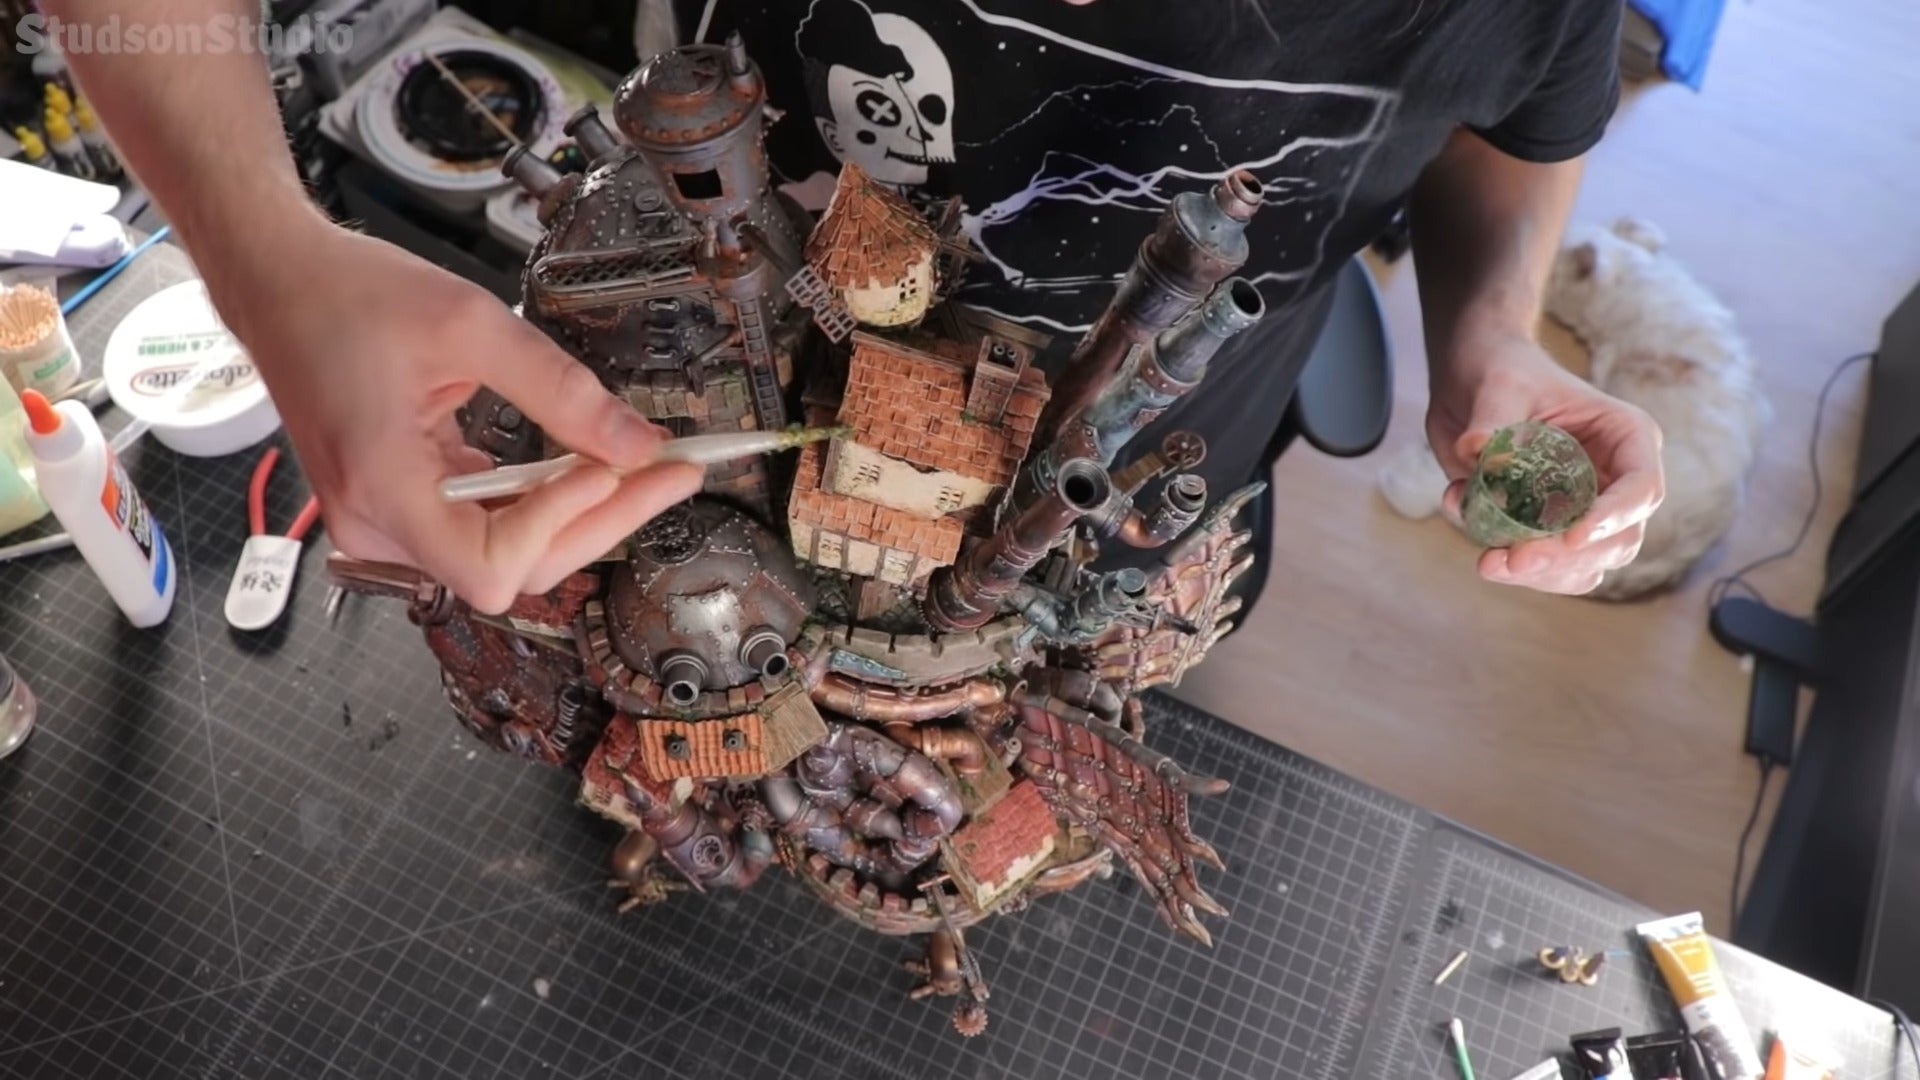 When finished, the model is perfection. Bravo. Well done. (Screenshot: Studson Studio/YouTube)